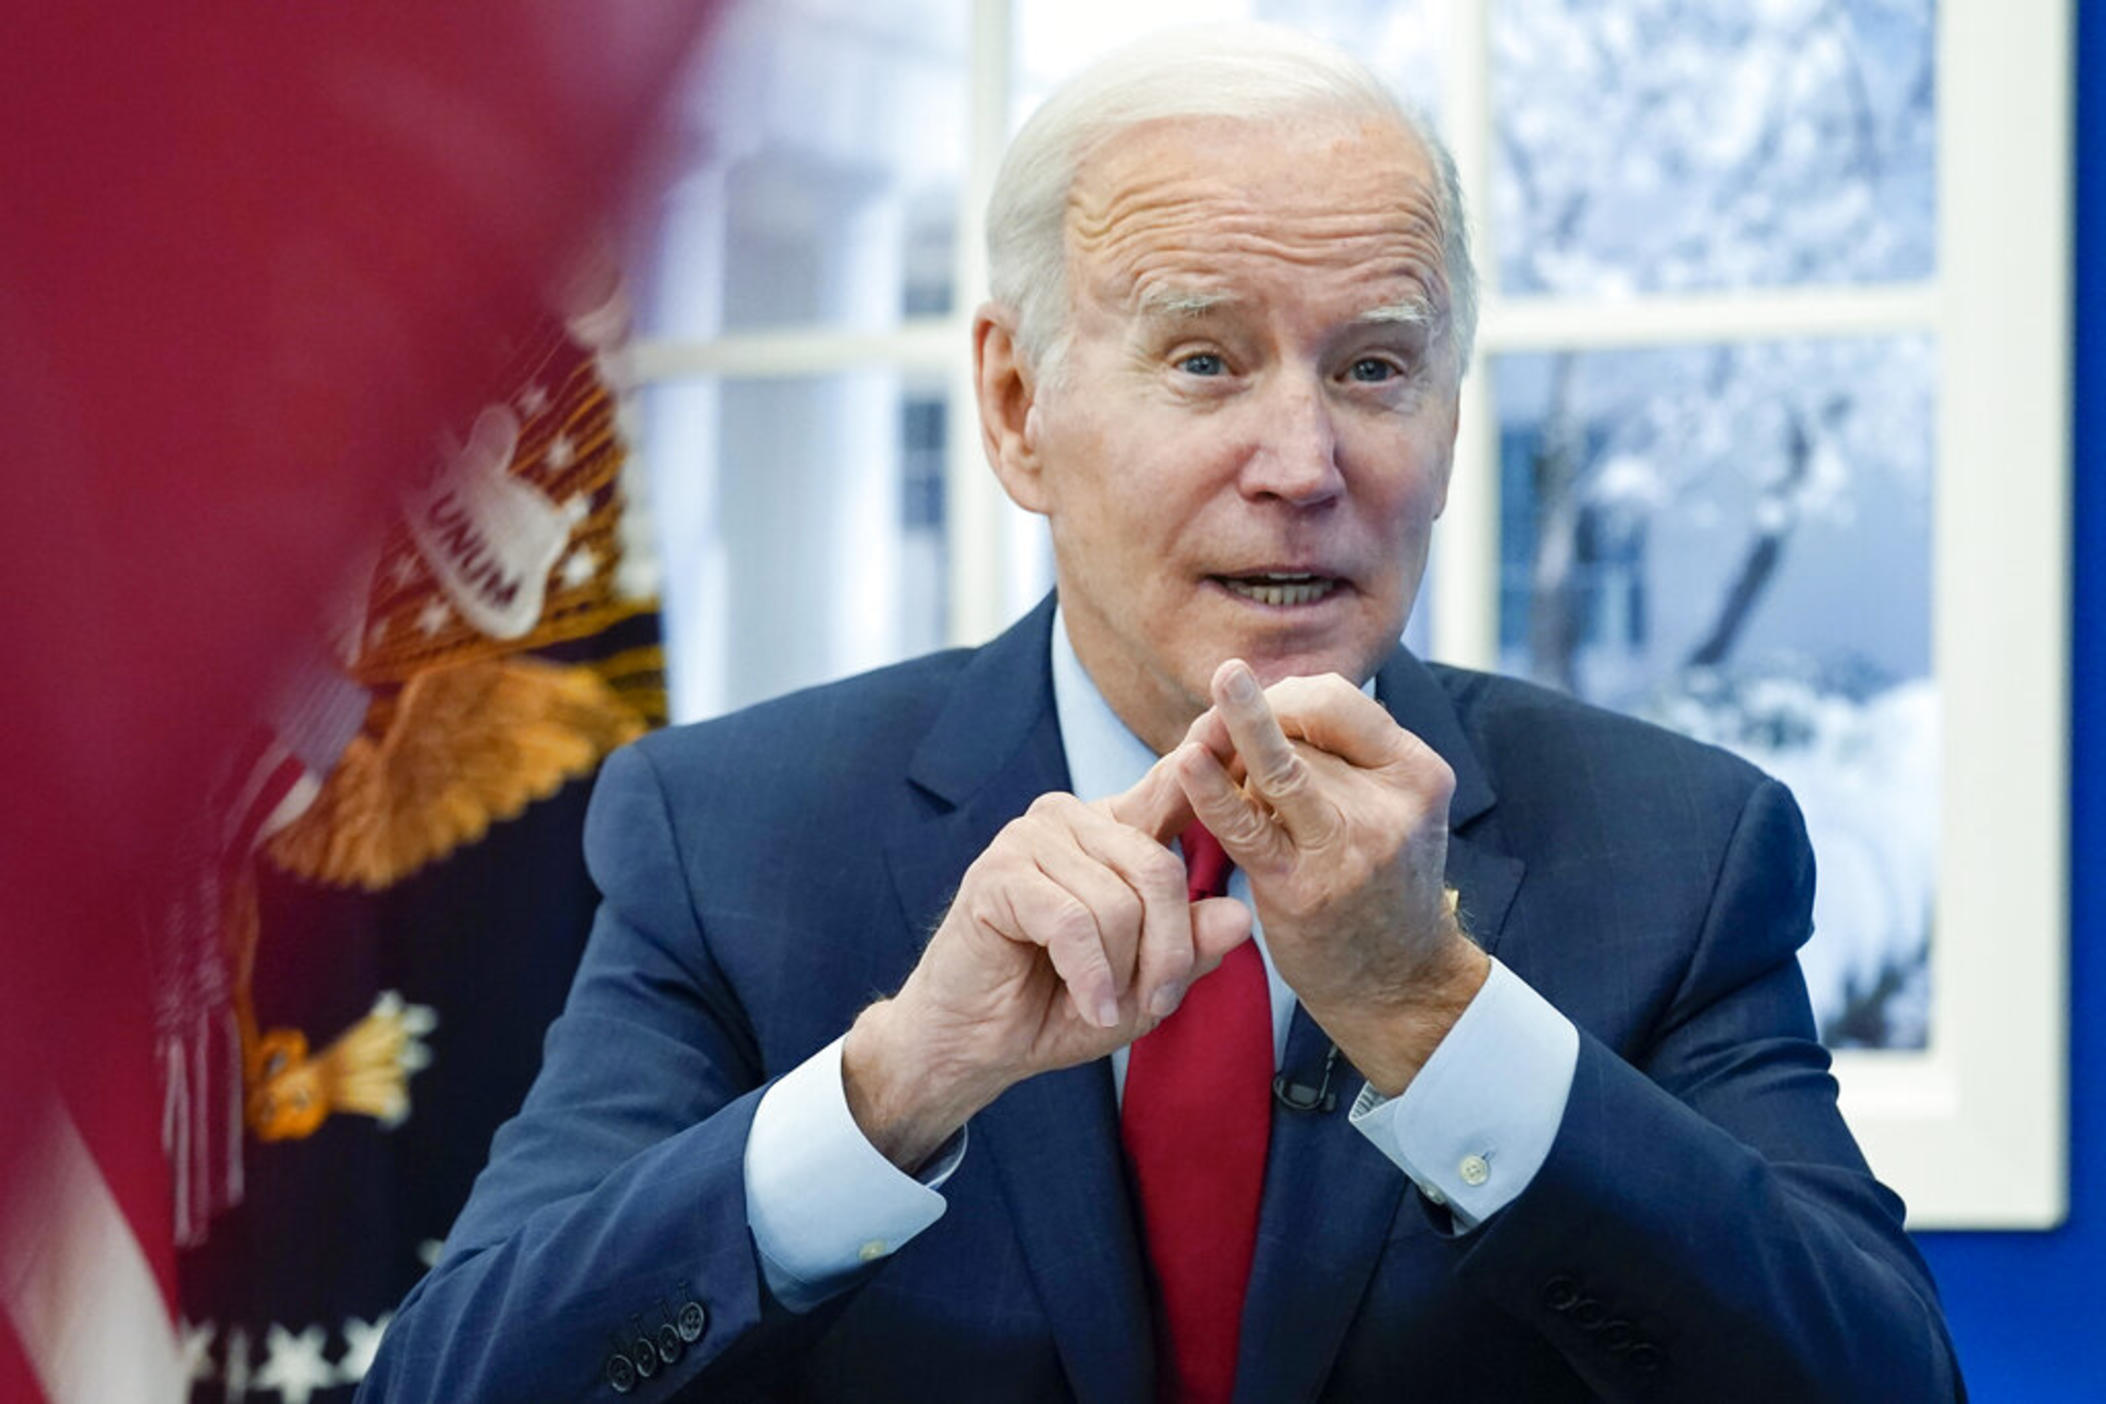 President Joe Biden speaks as he meets with the White House COVID-19 Response Team on the latest developments related to the Omicron variant in the South Court Auditorium in the Eisenhower Executive Office Building on the White House Campus in Washington, Tuesday, Jan. 4, 2022.